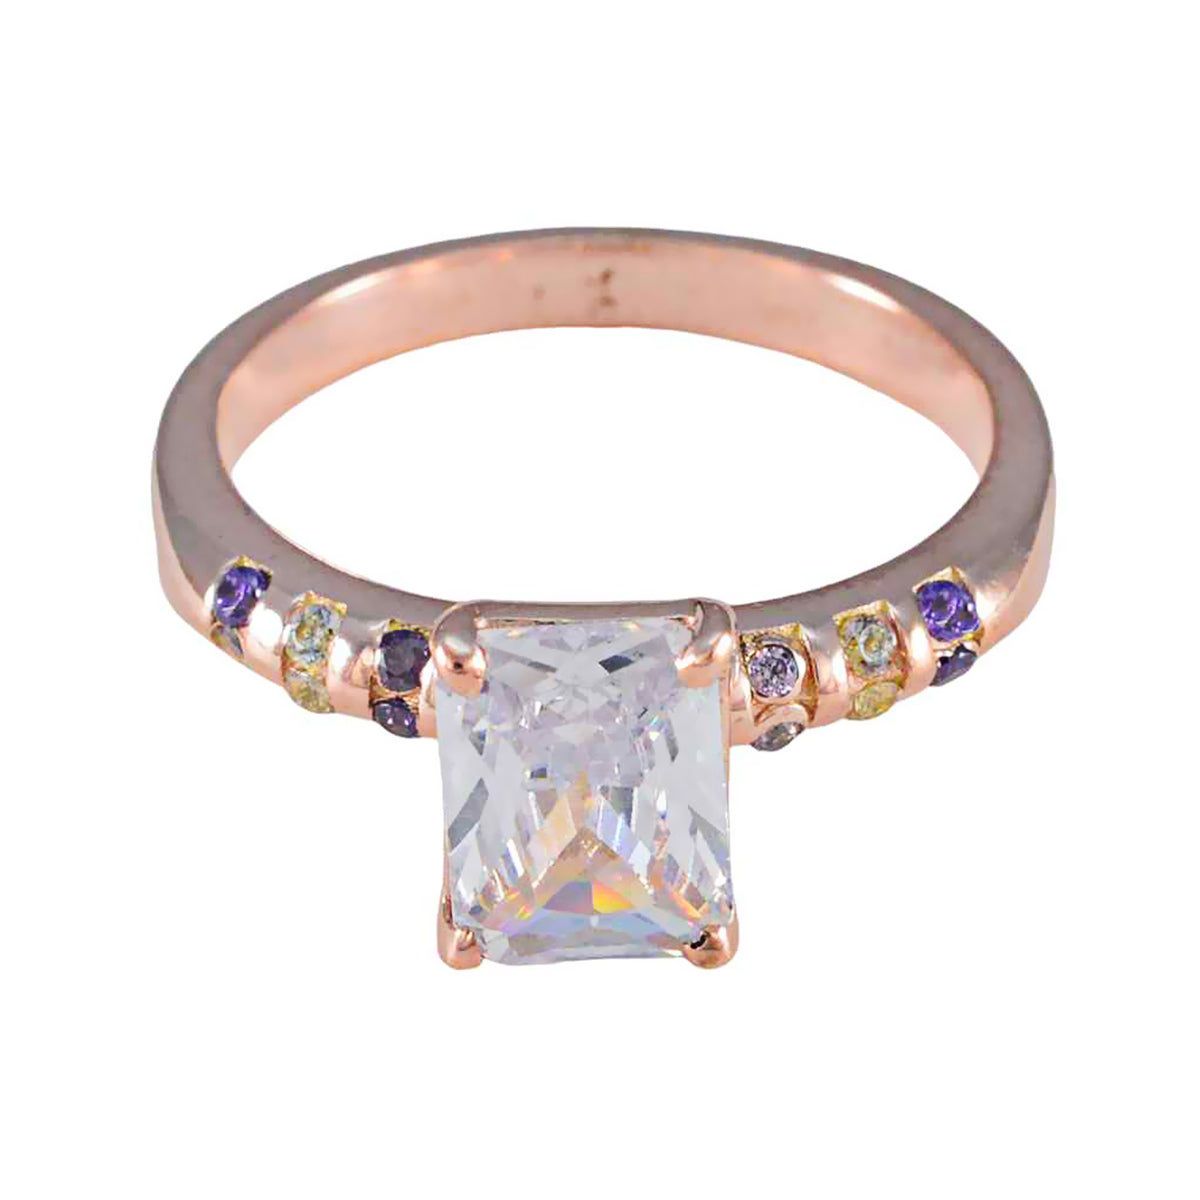 Riyo Prime Silver Ring With Rose Gold Plating Amethyst Stone Octagon Shape Prong Setting Antique Jewelry Birthday Ring